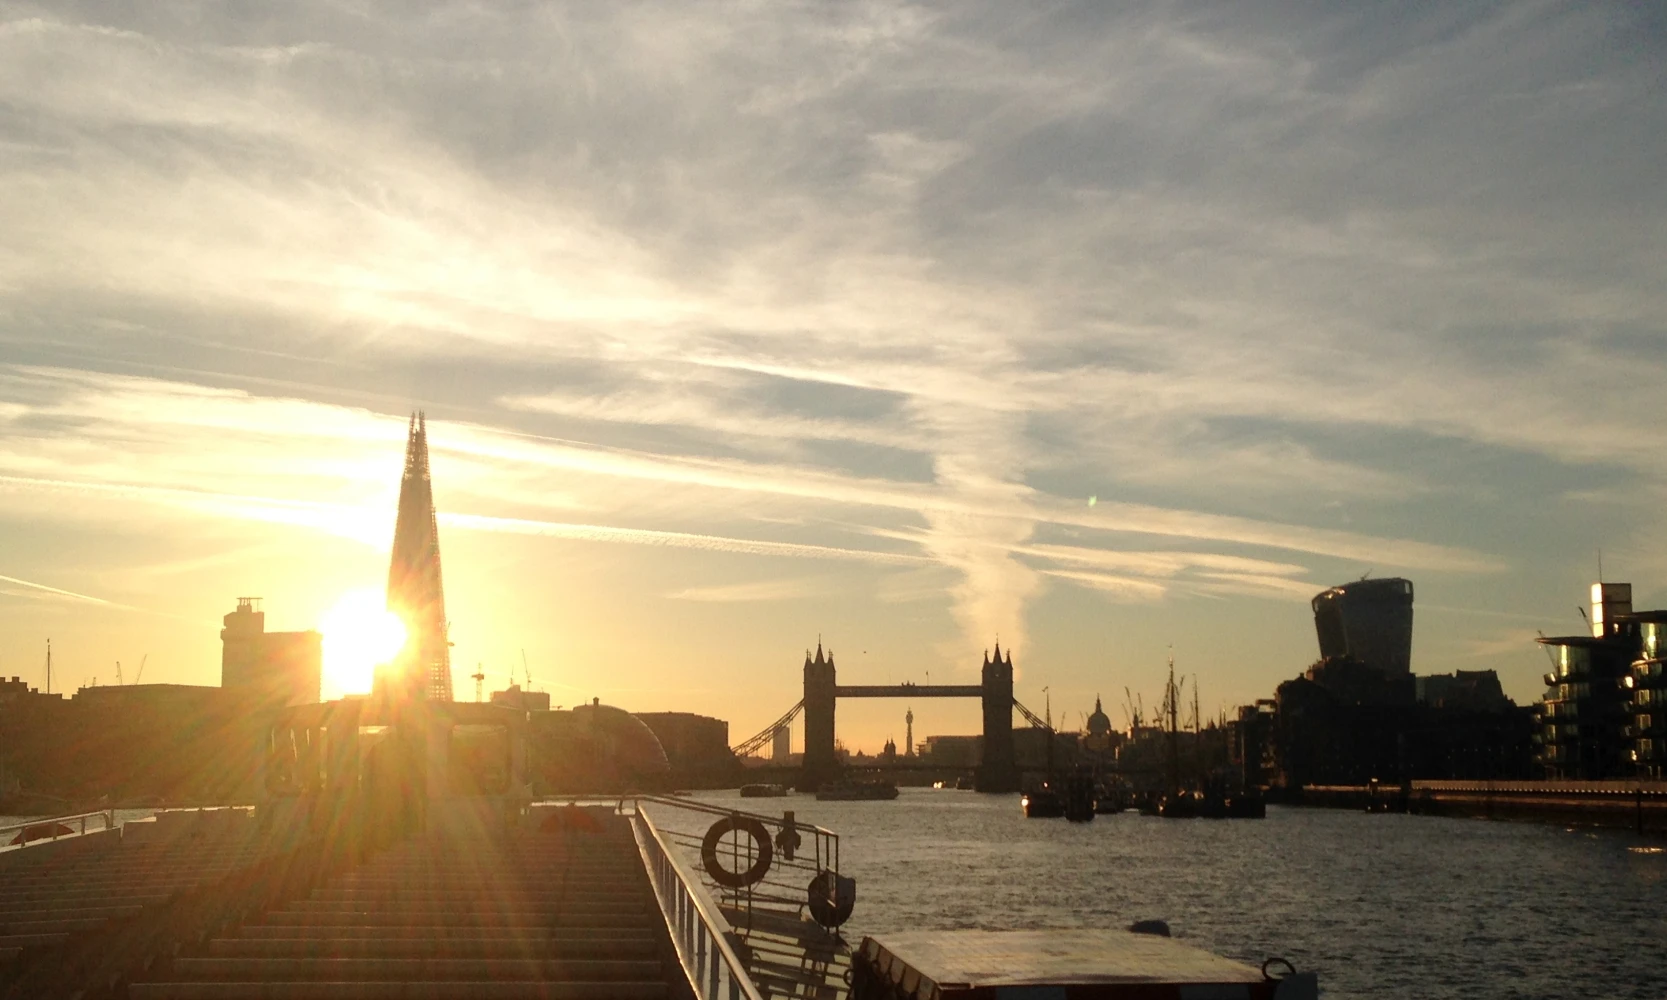 City Cruises -  Evening Cruise on the River Thames: What to expect - 2